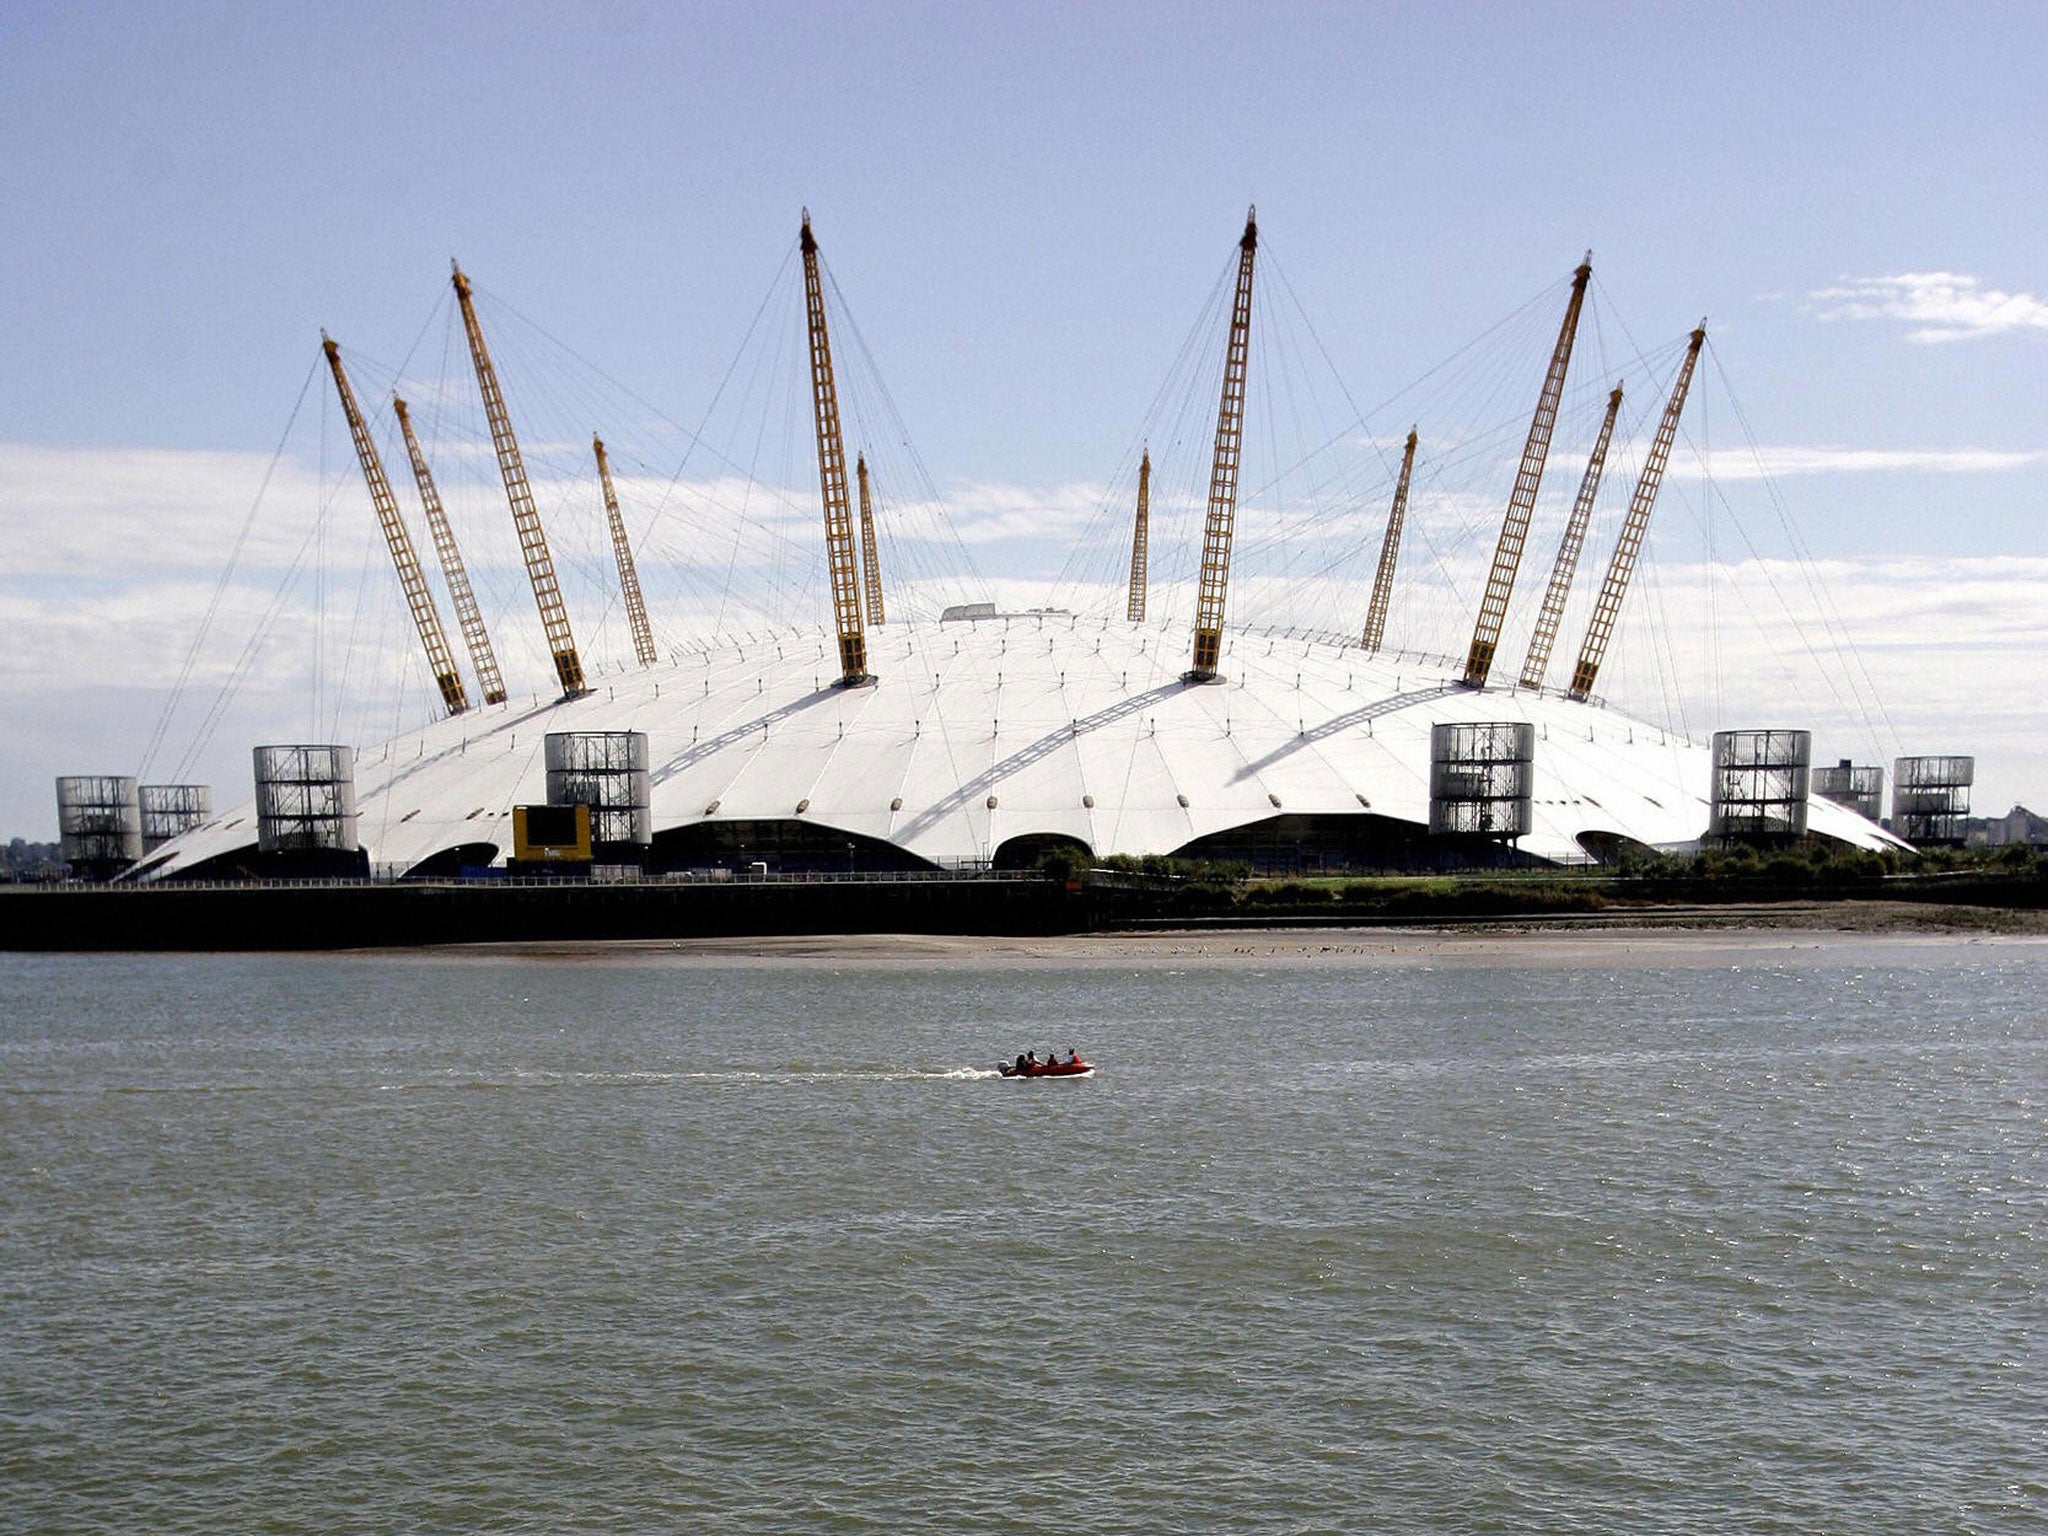 Millennium Dome, London: The Dome, now the O2 arena, opened in Greenwich in December 2000. Resembles a large circular marquee or giant 'Big Top'. Supported by 12 yellow towers – one for each month of the year. The largest structure of its kind in the wor